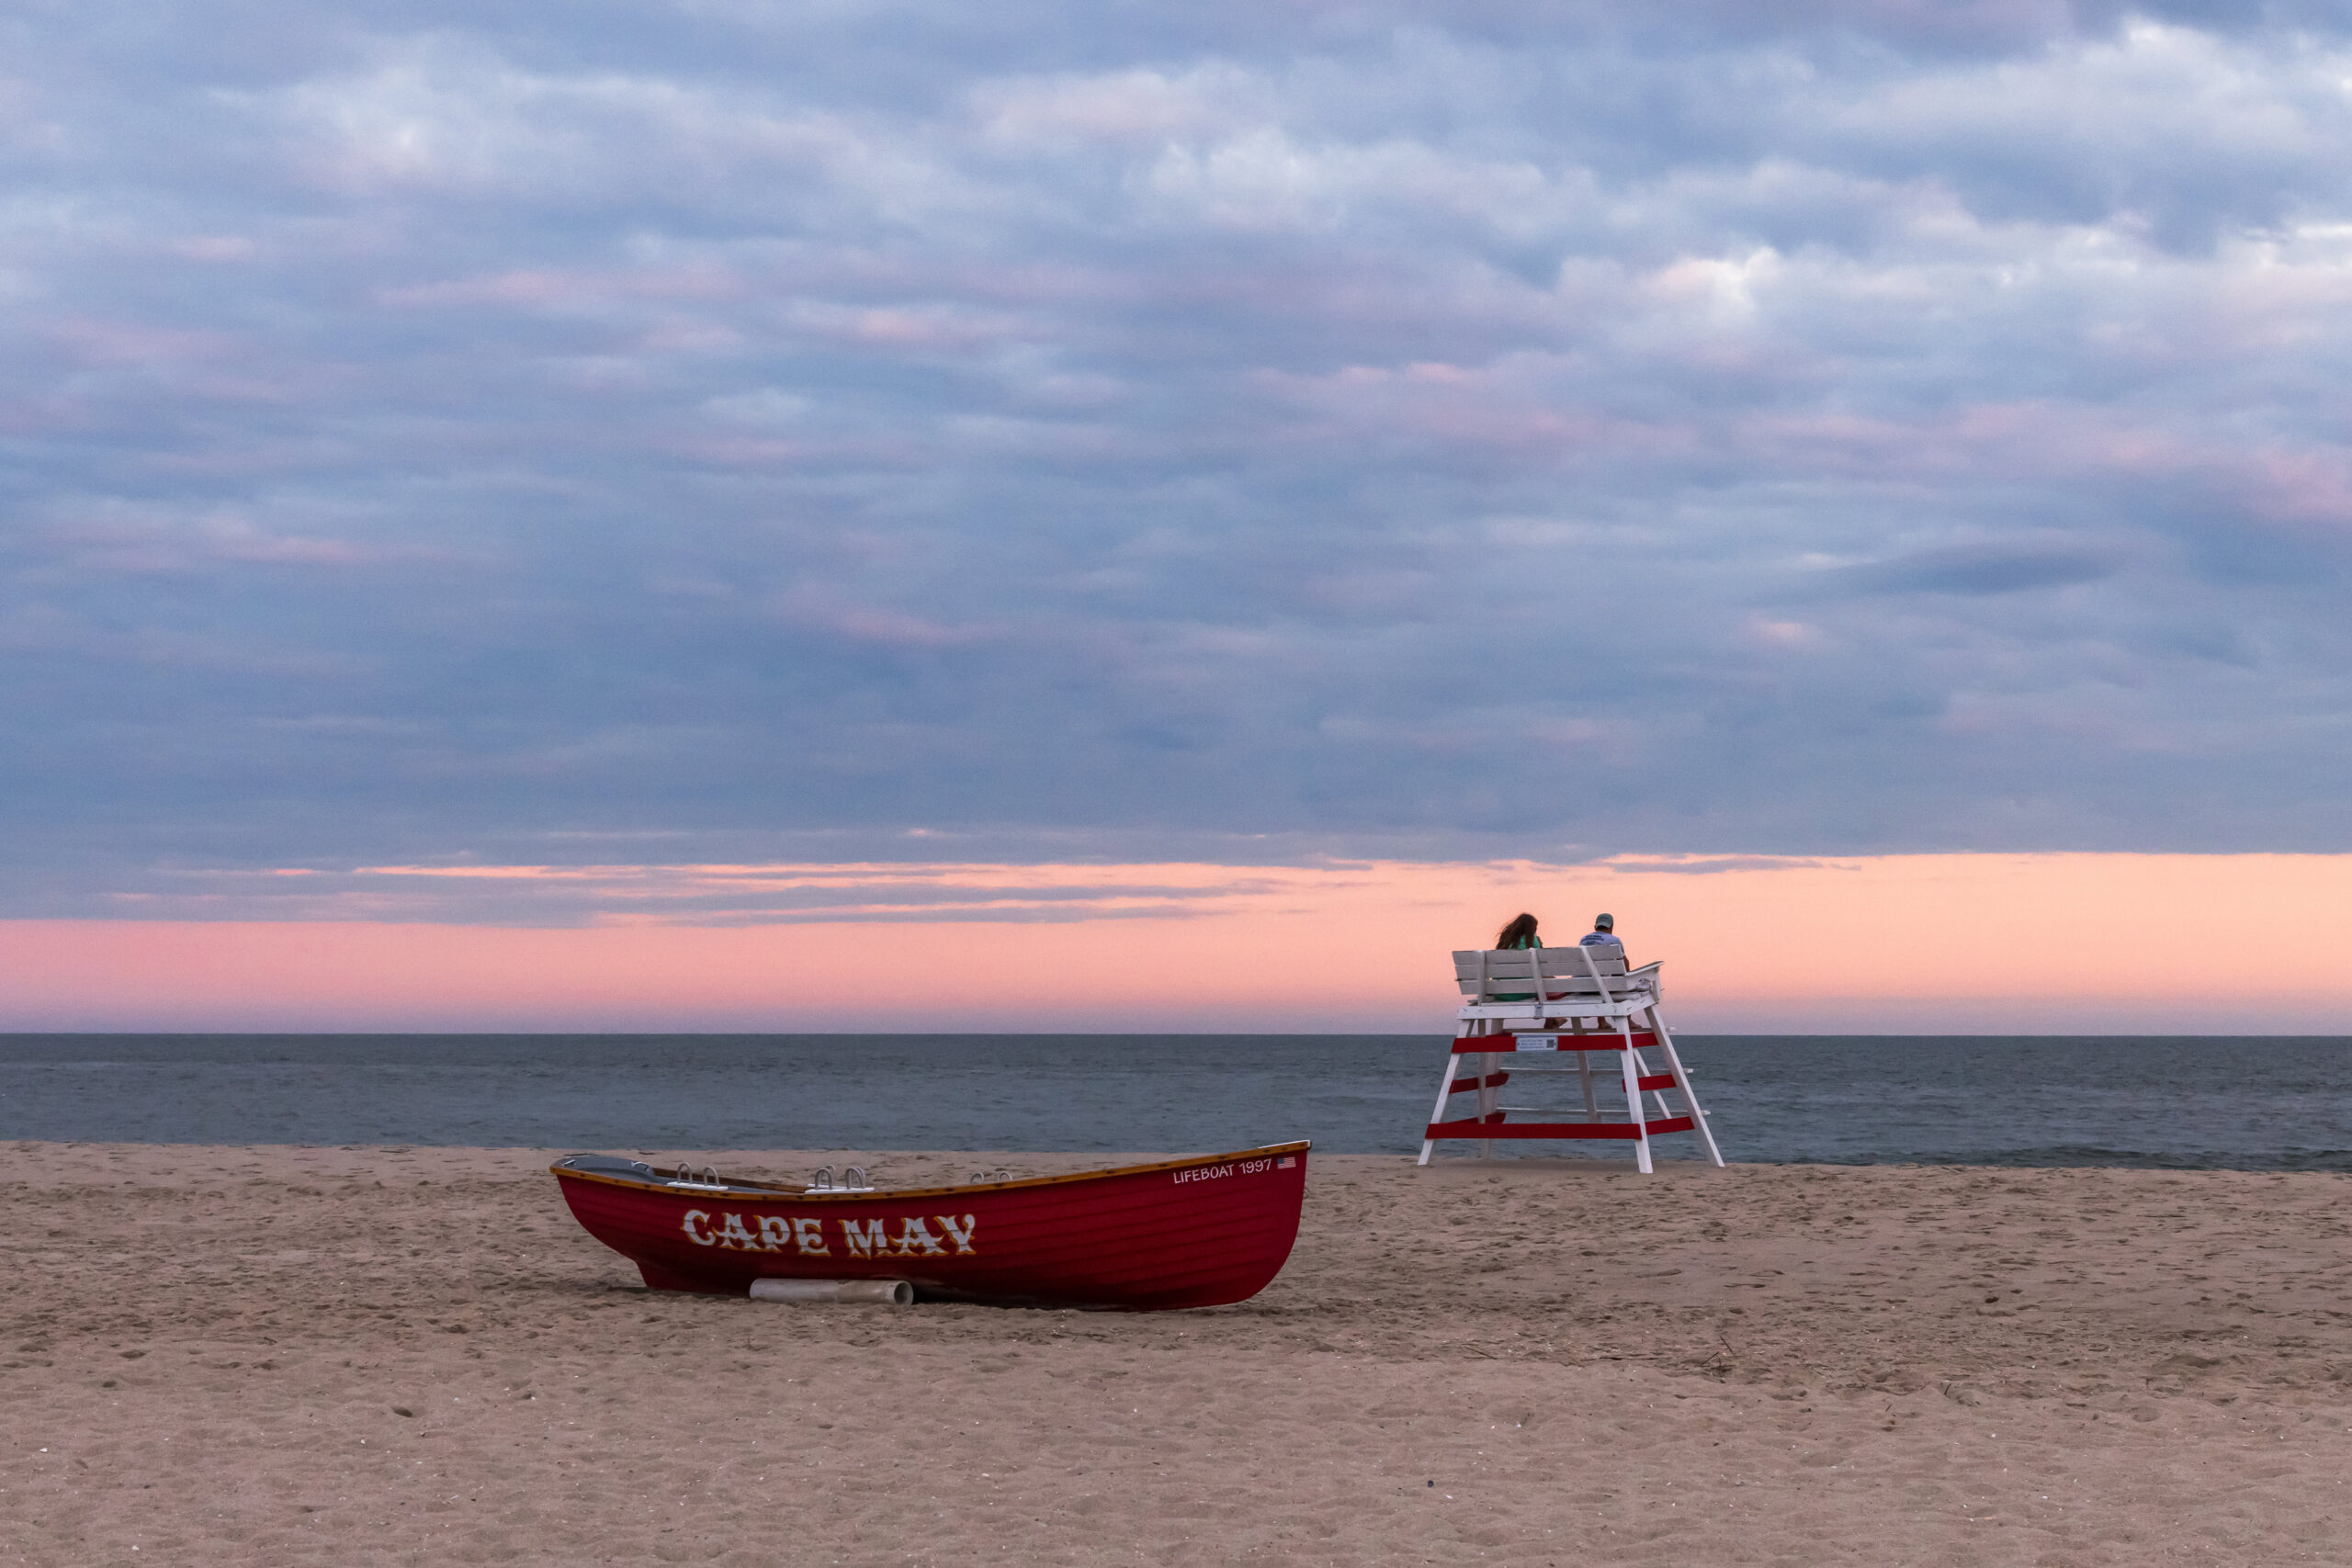 Two people sitting on a lifeguard stand at the beach with a red Cape May lifeguard boat and clouds in the sky with pink at the horizon line